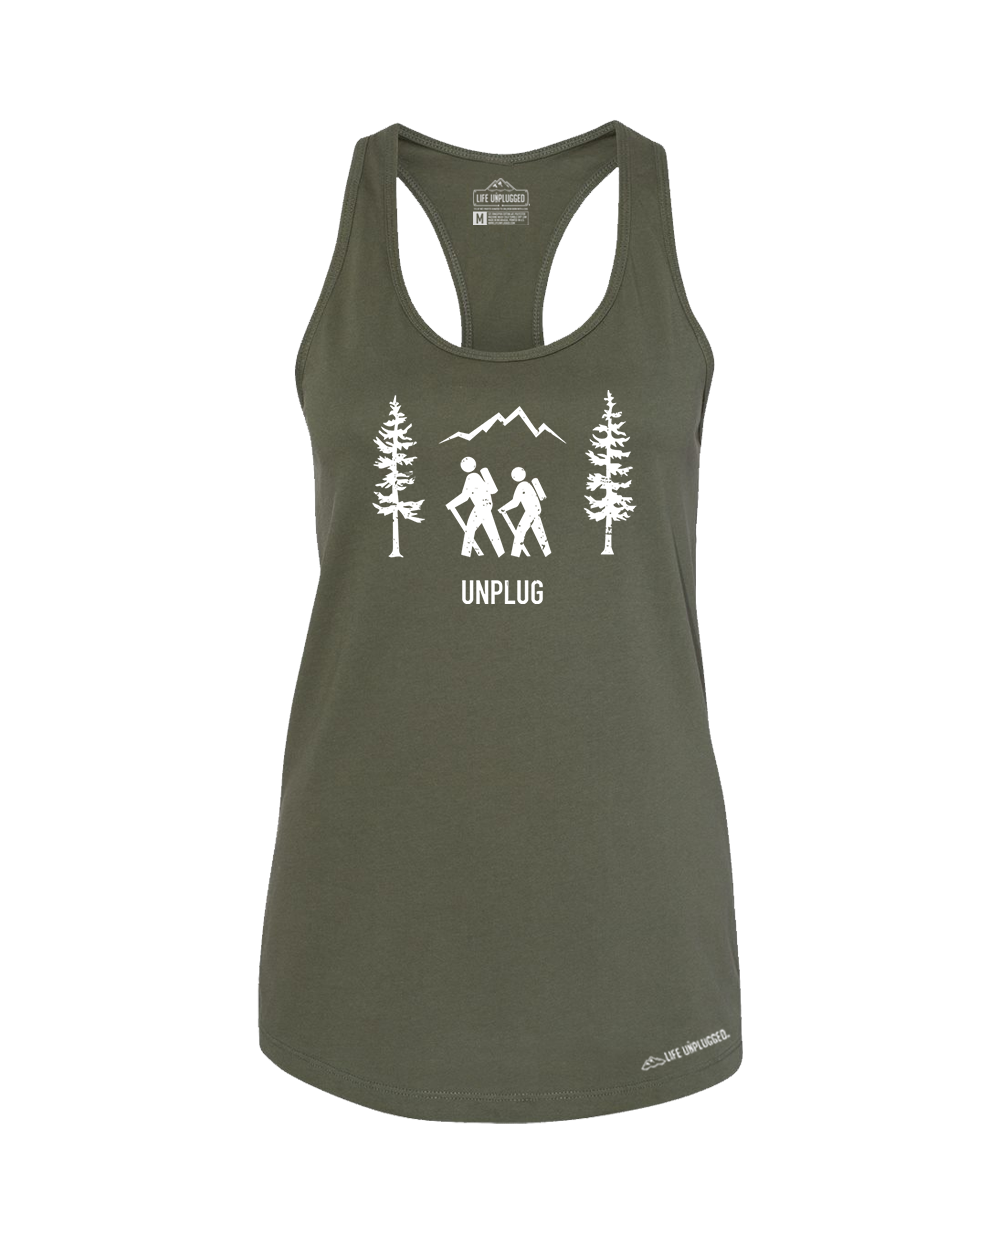 Hiking Scene Premium Women's Relaxed Fit Racerback Tank Top - Life Unplugged